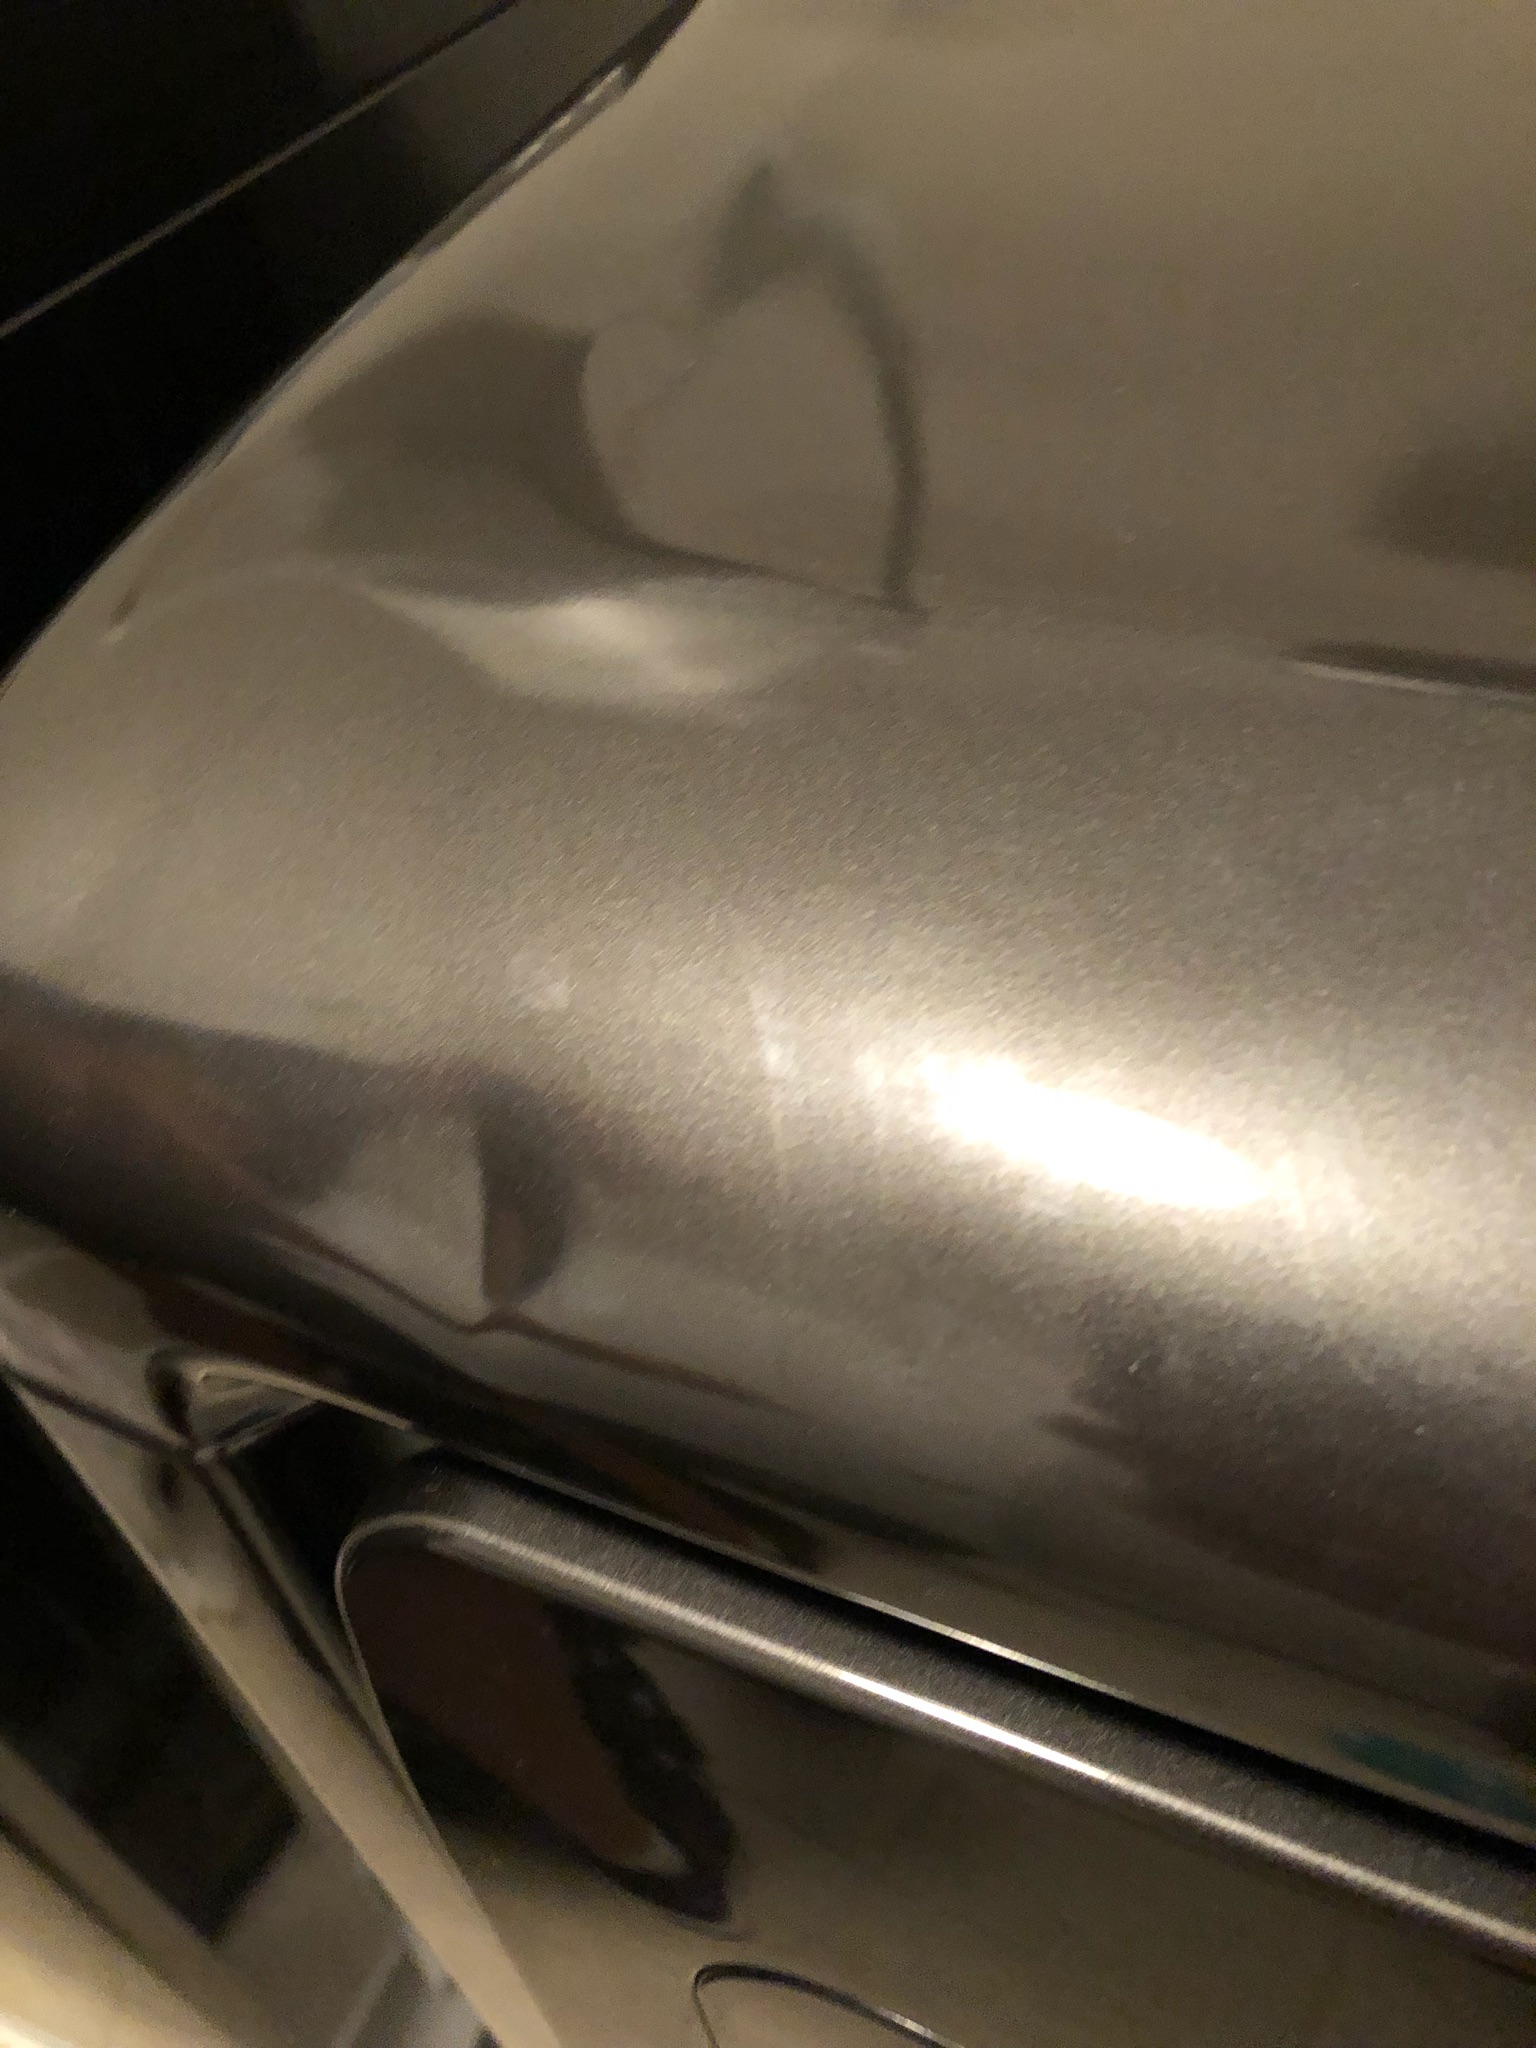 Dented steel on washer